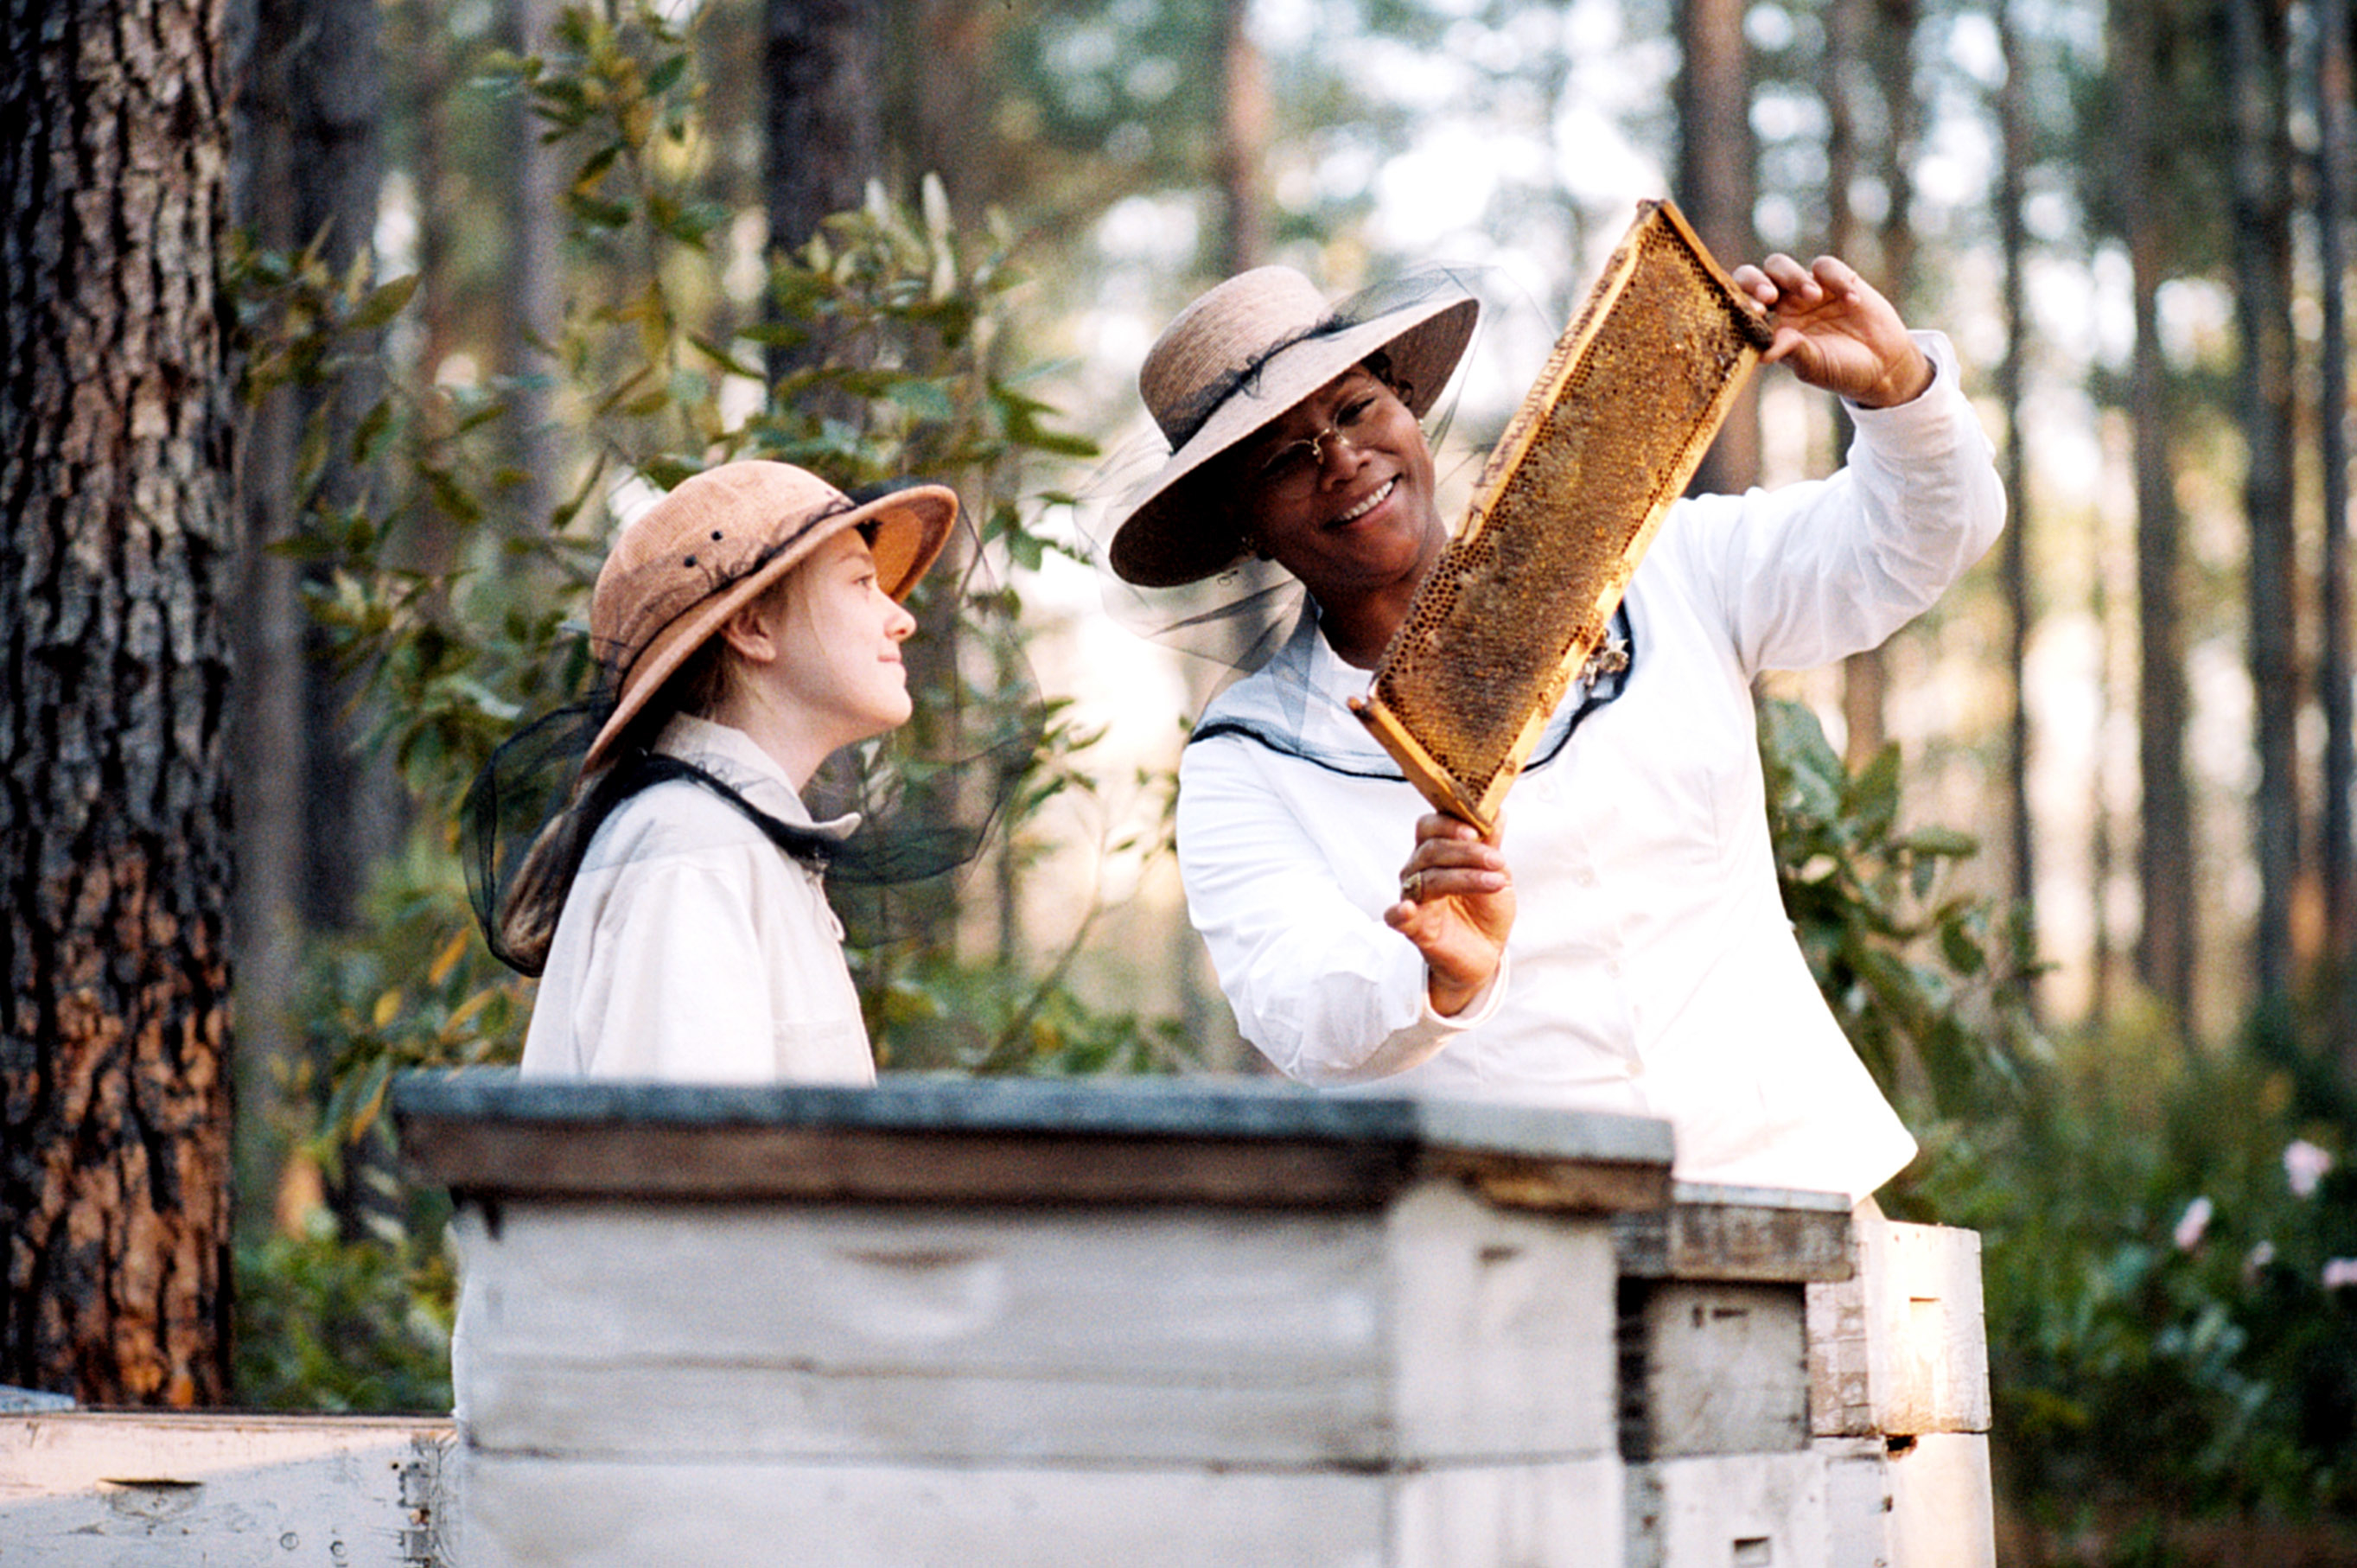 Two people in beekeeping suits inspect a honeycomb frame outdoors